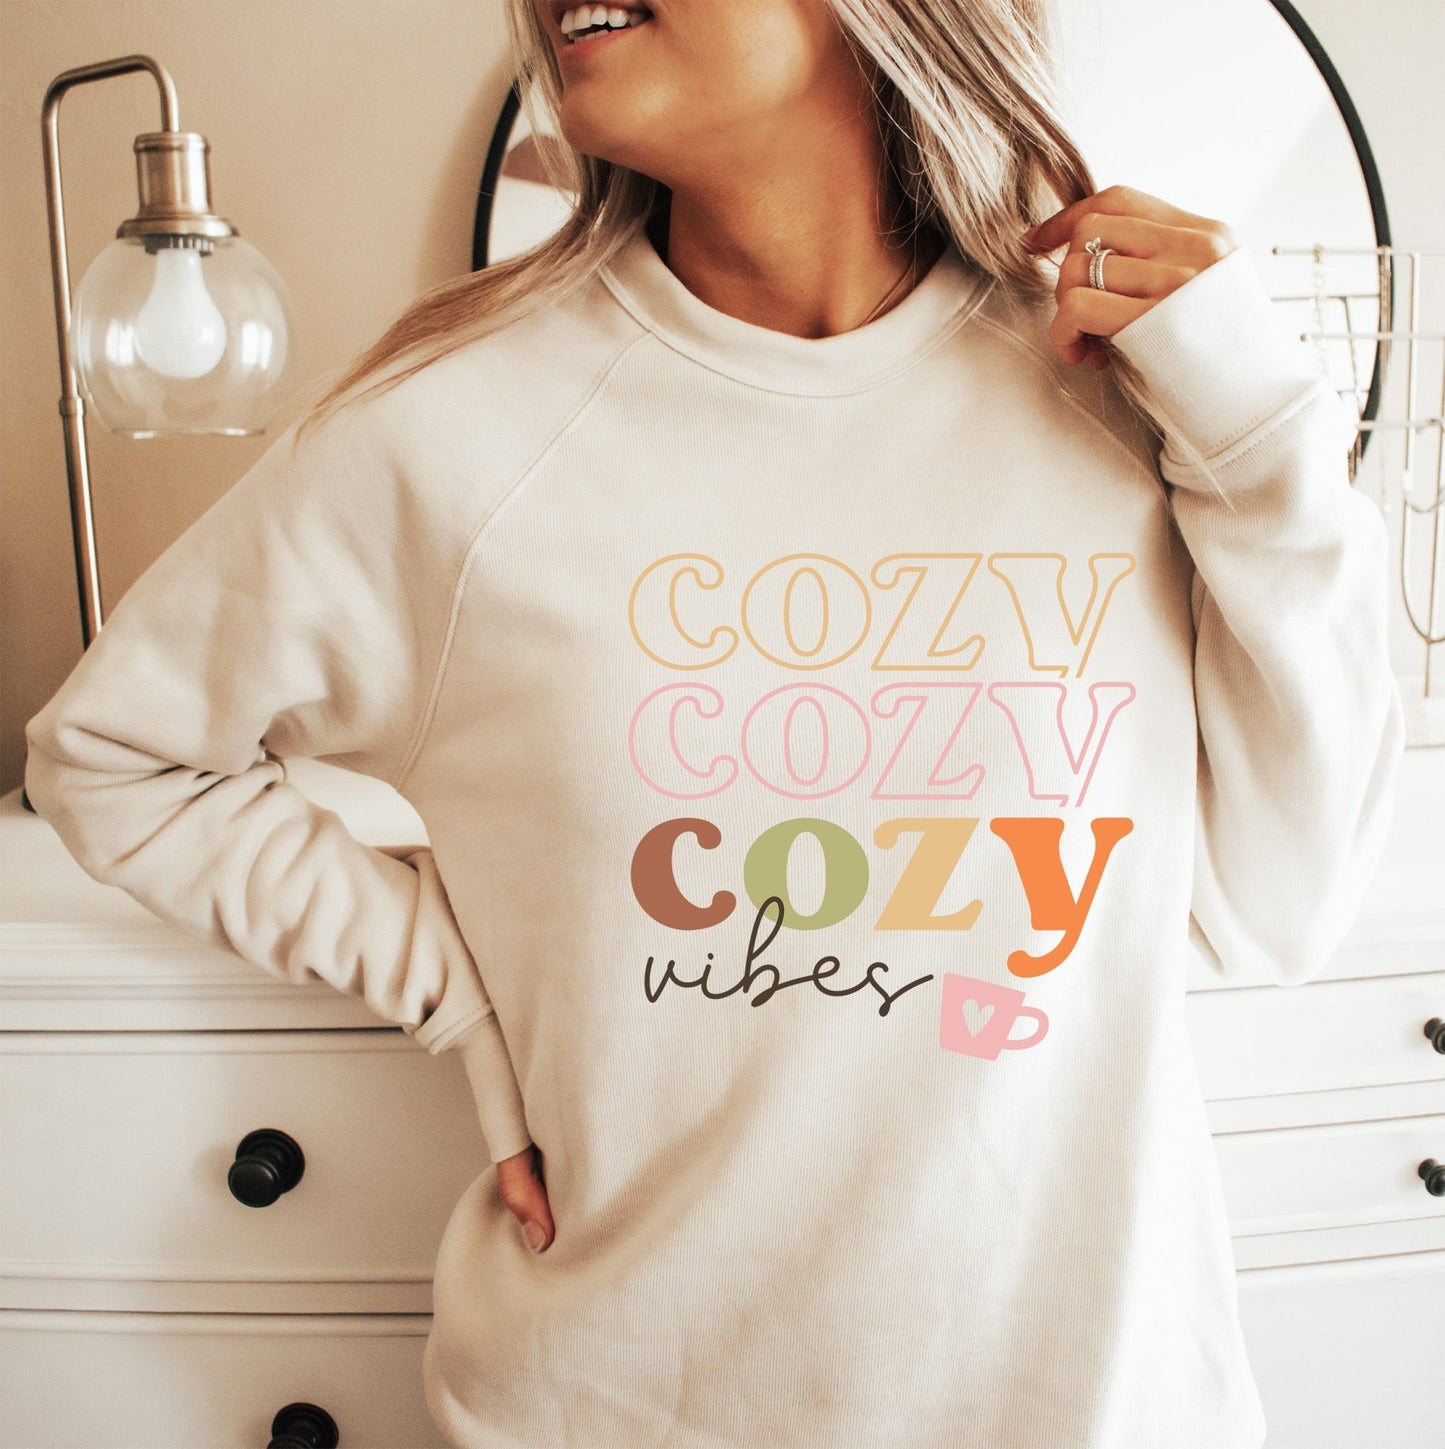 Cozy Cozy Cozy Vibes DTF Full Color Transfer - Crown Transfers